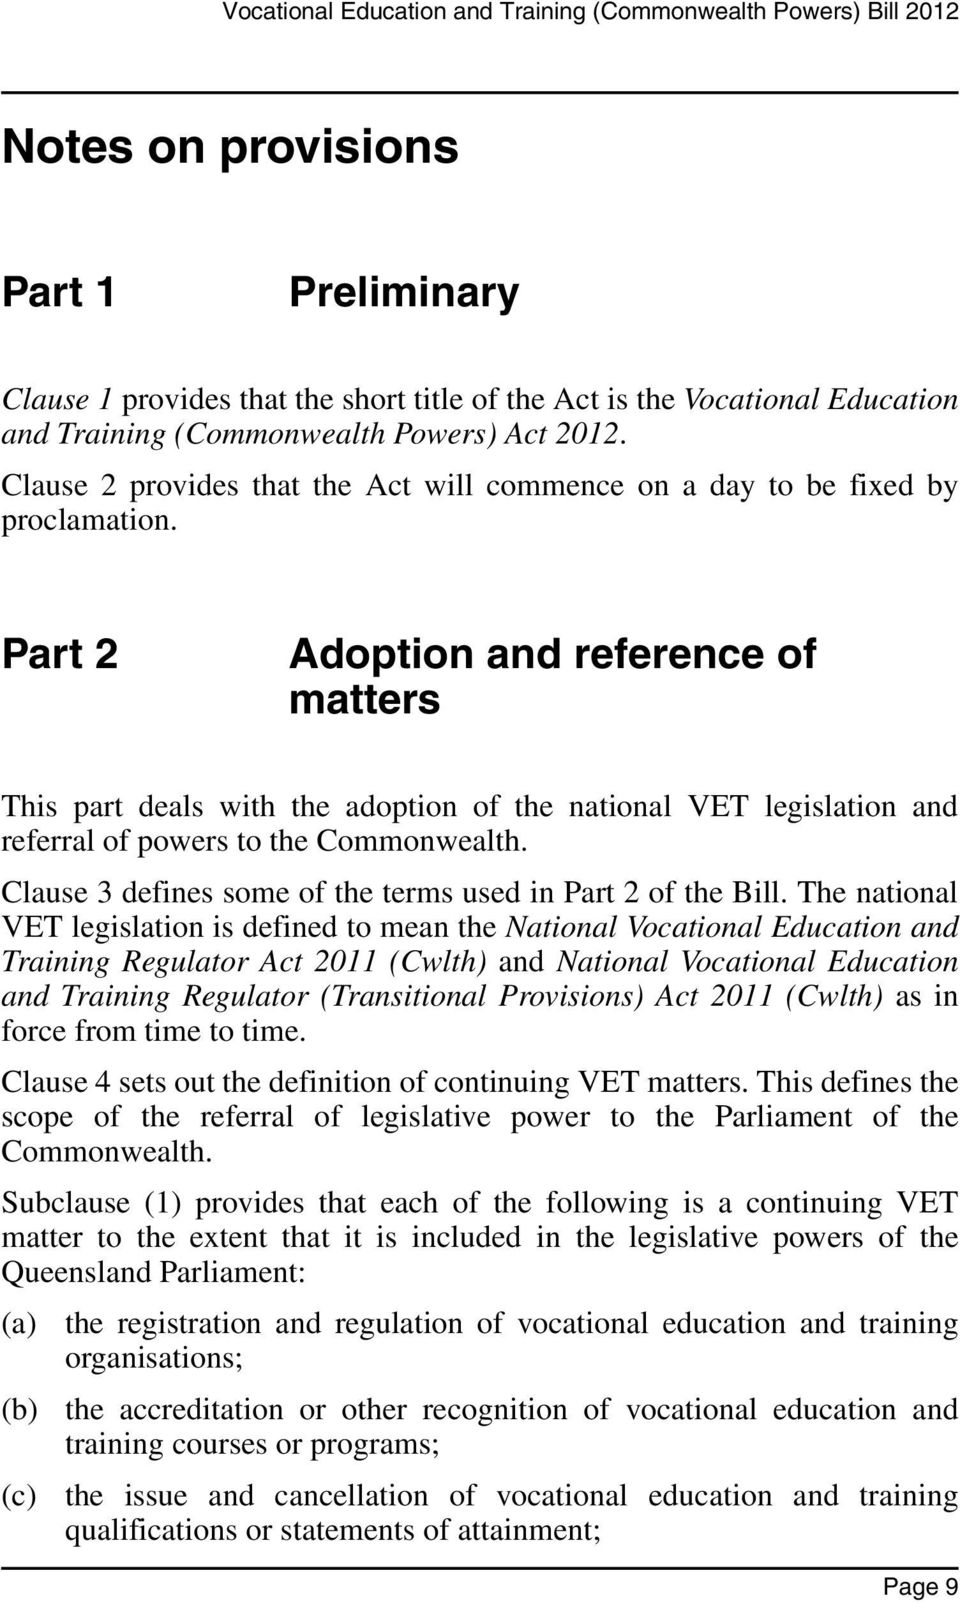 Part 2 Adoption and reference of matters This part deals with the adoption of the national VET legislation and referral of powers to the Commonwealth.